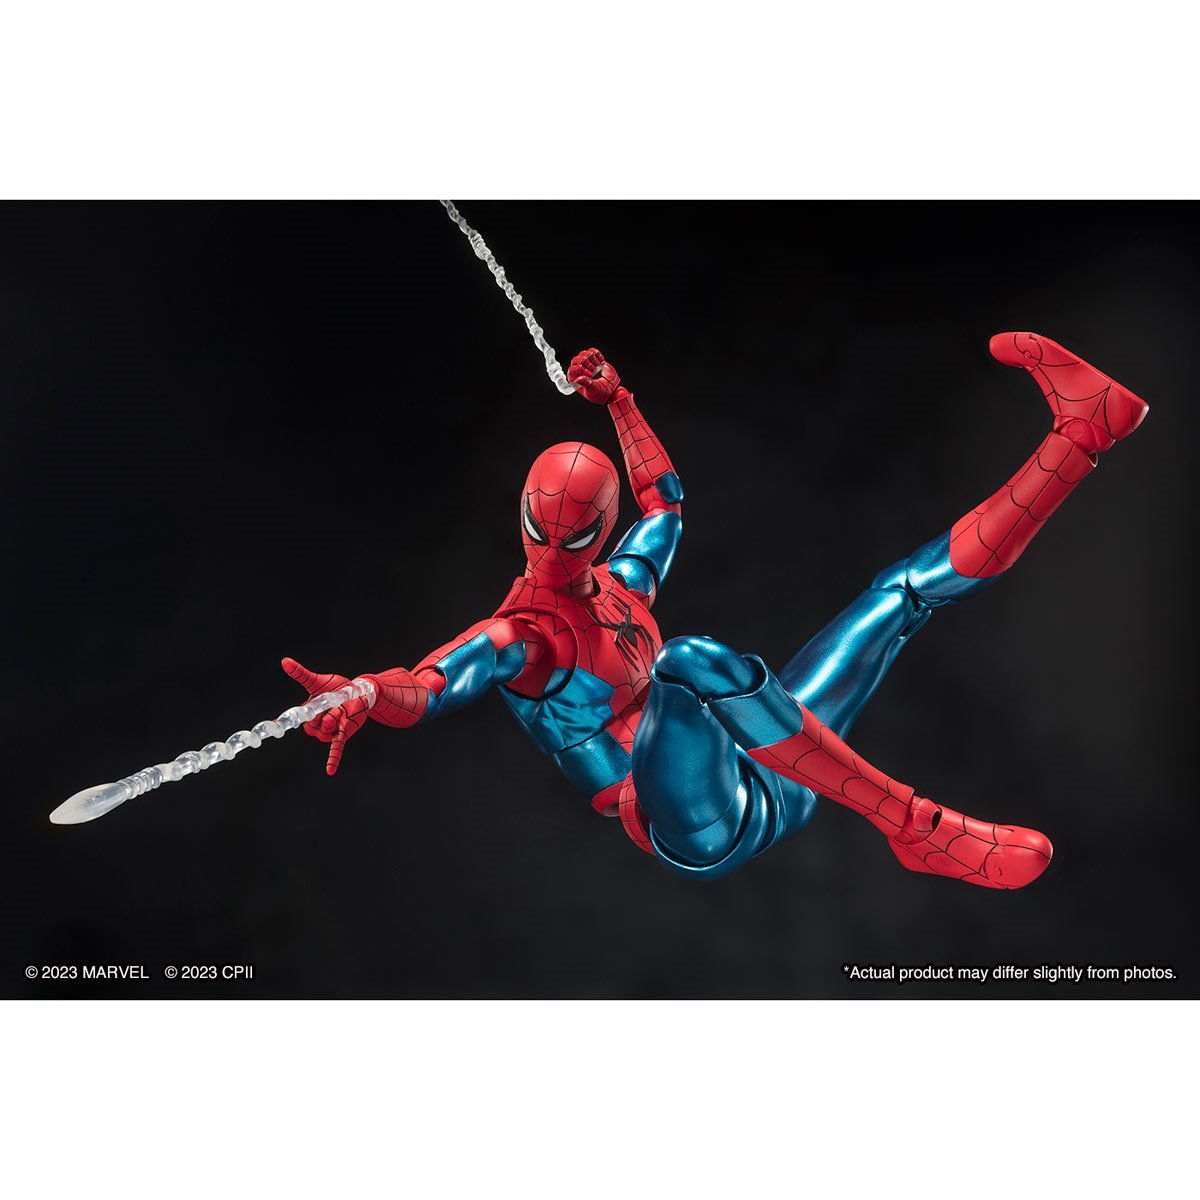 Figurine Spider-Man [New Red & Blue Suit] S.H.Figuarts Bandai